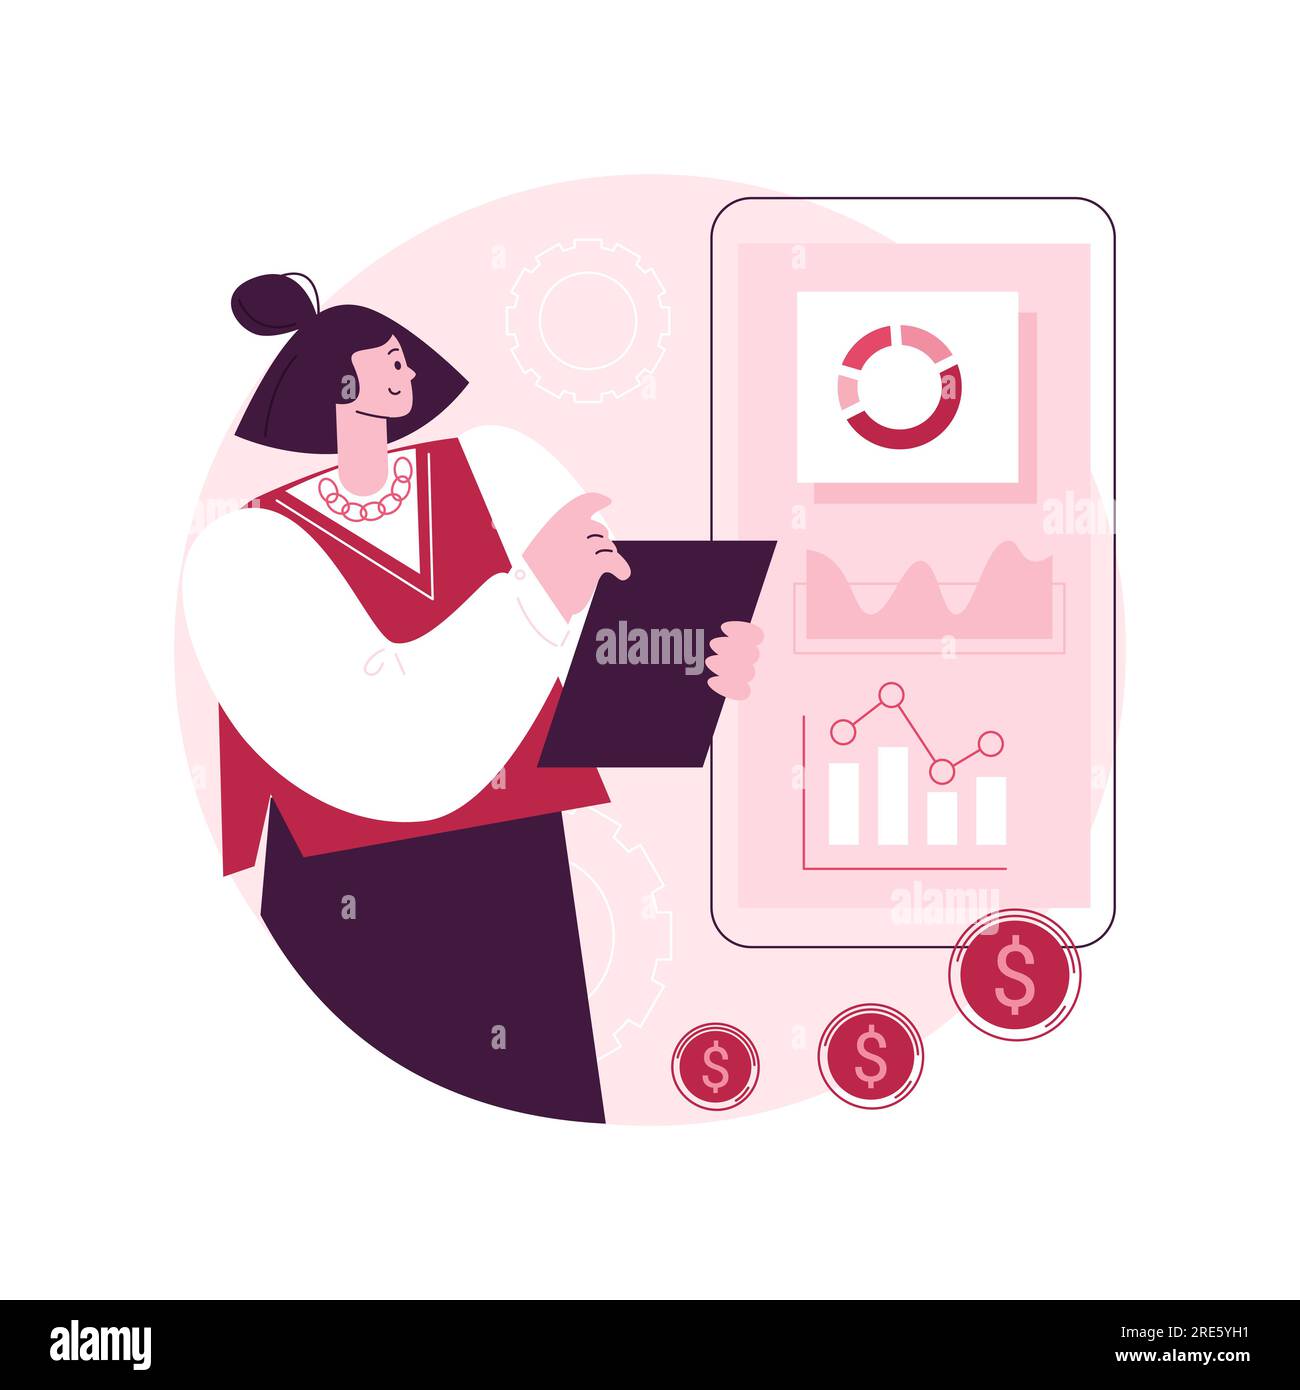 Mobile expense management abstract concept vector illustration. Charges control system, sattelite devices checking, mobile network, enterprise economy, manage telephony costs abstract metaphor. Stock Vector